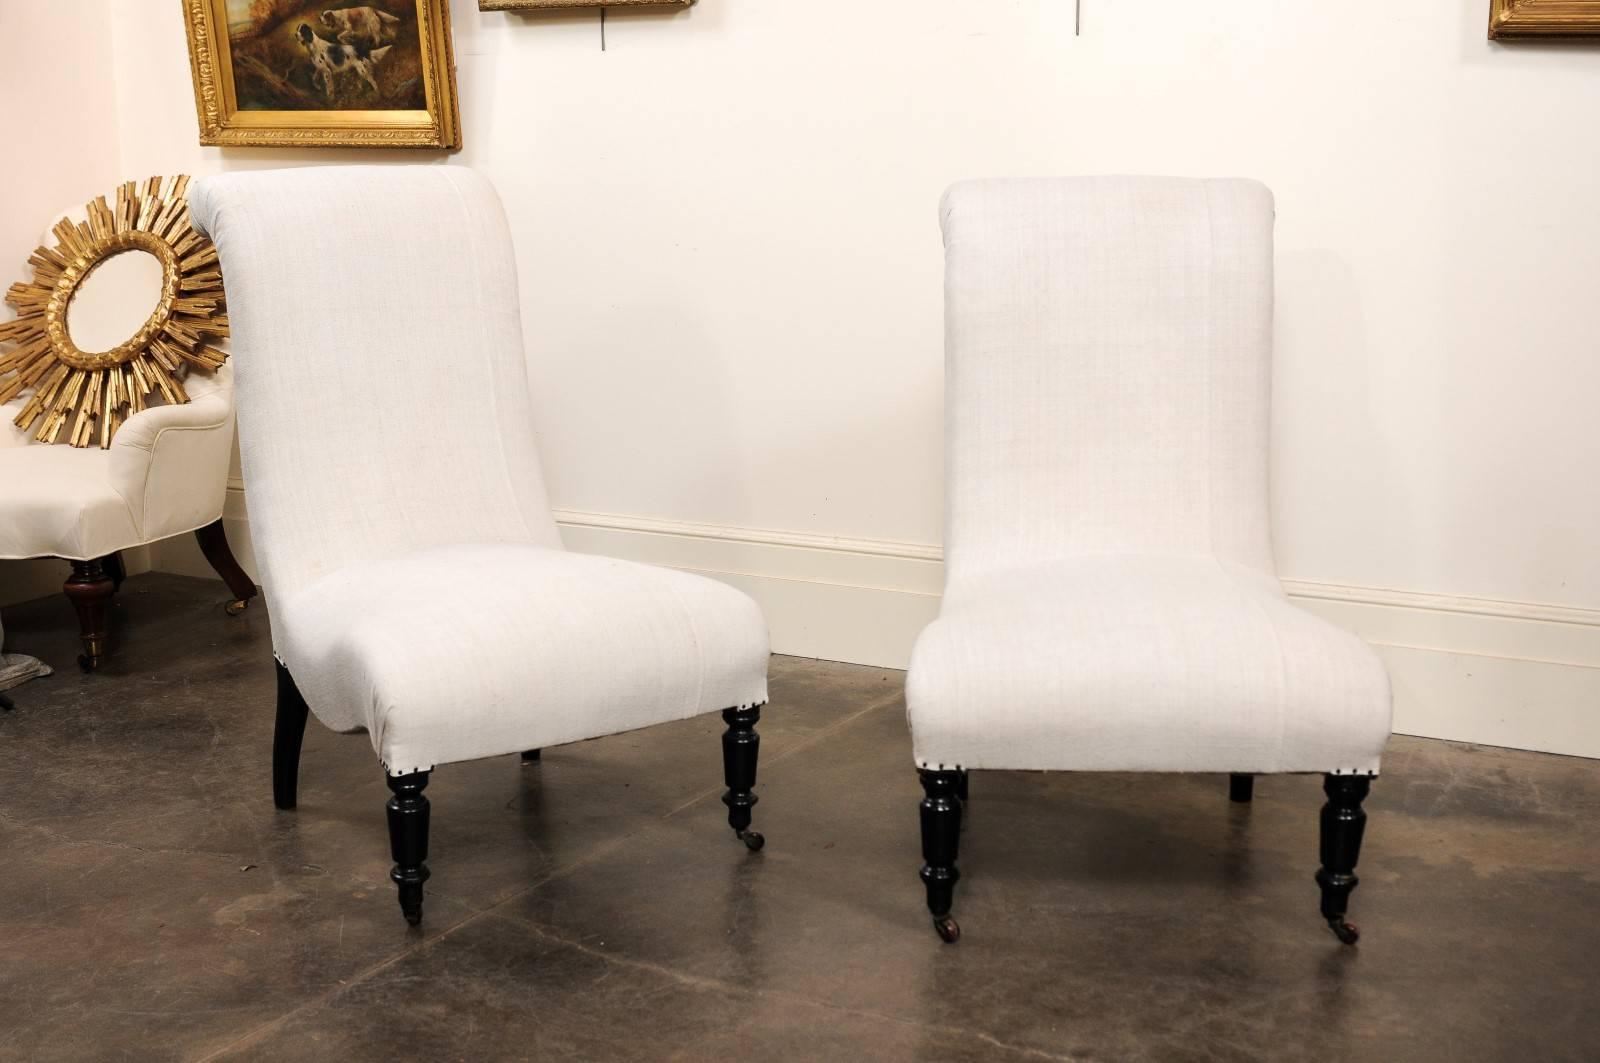 This fabulous pair of English upholstered slipper chairs from the turn of the century (19th-20th) features out-scrolled backs over nicely curved seats. The chairs are raised on four ebonized oak feet, two turned with casters in the front and two